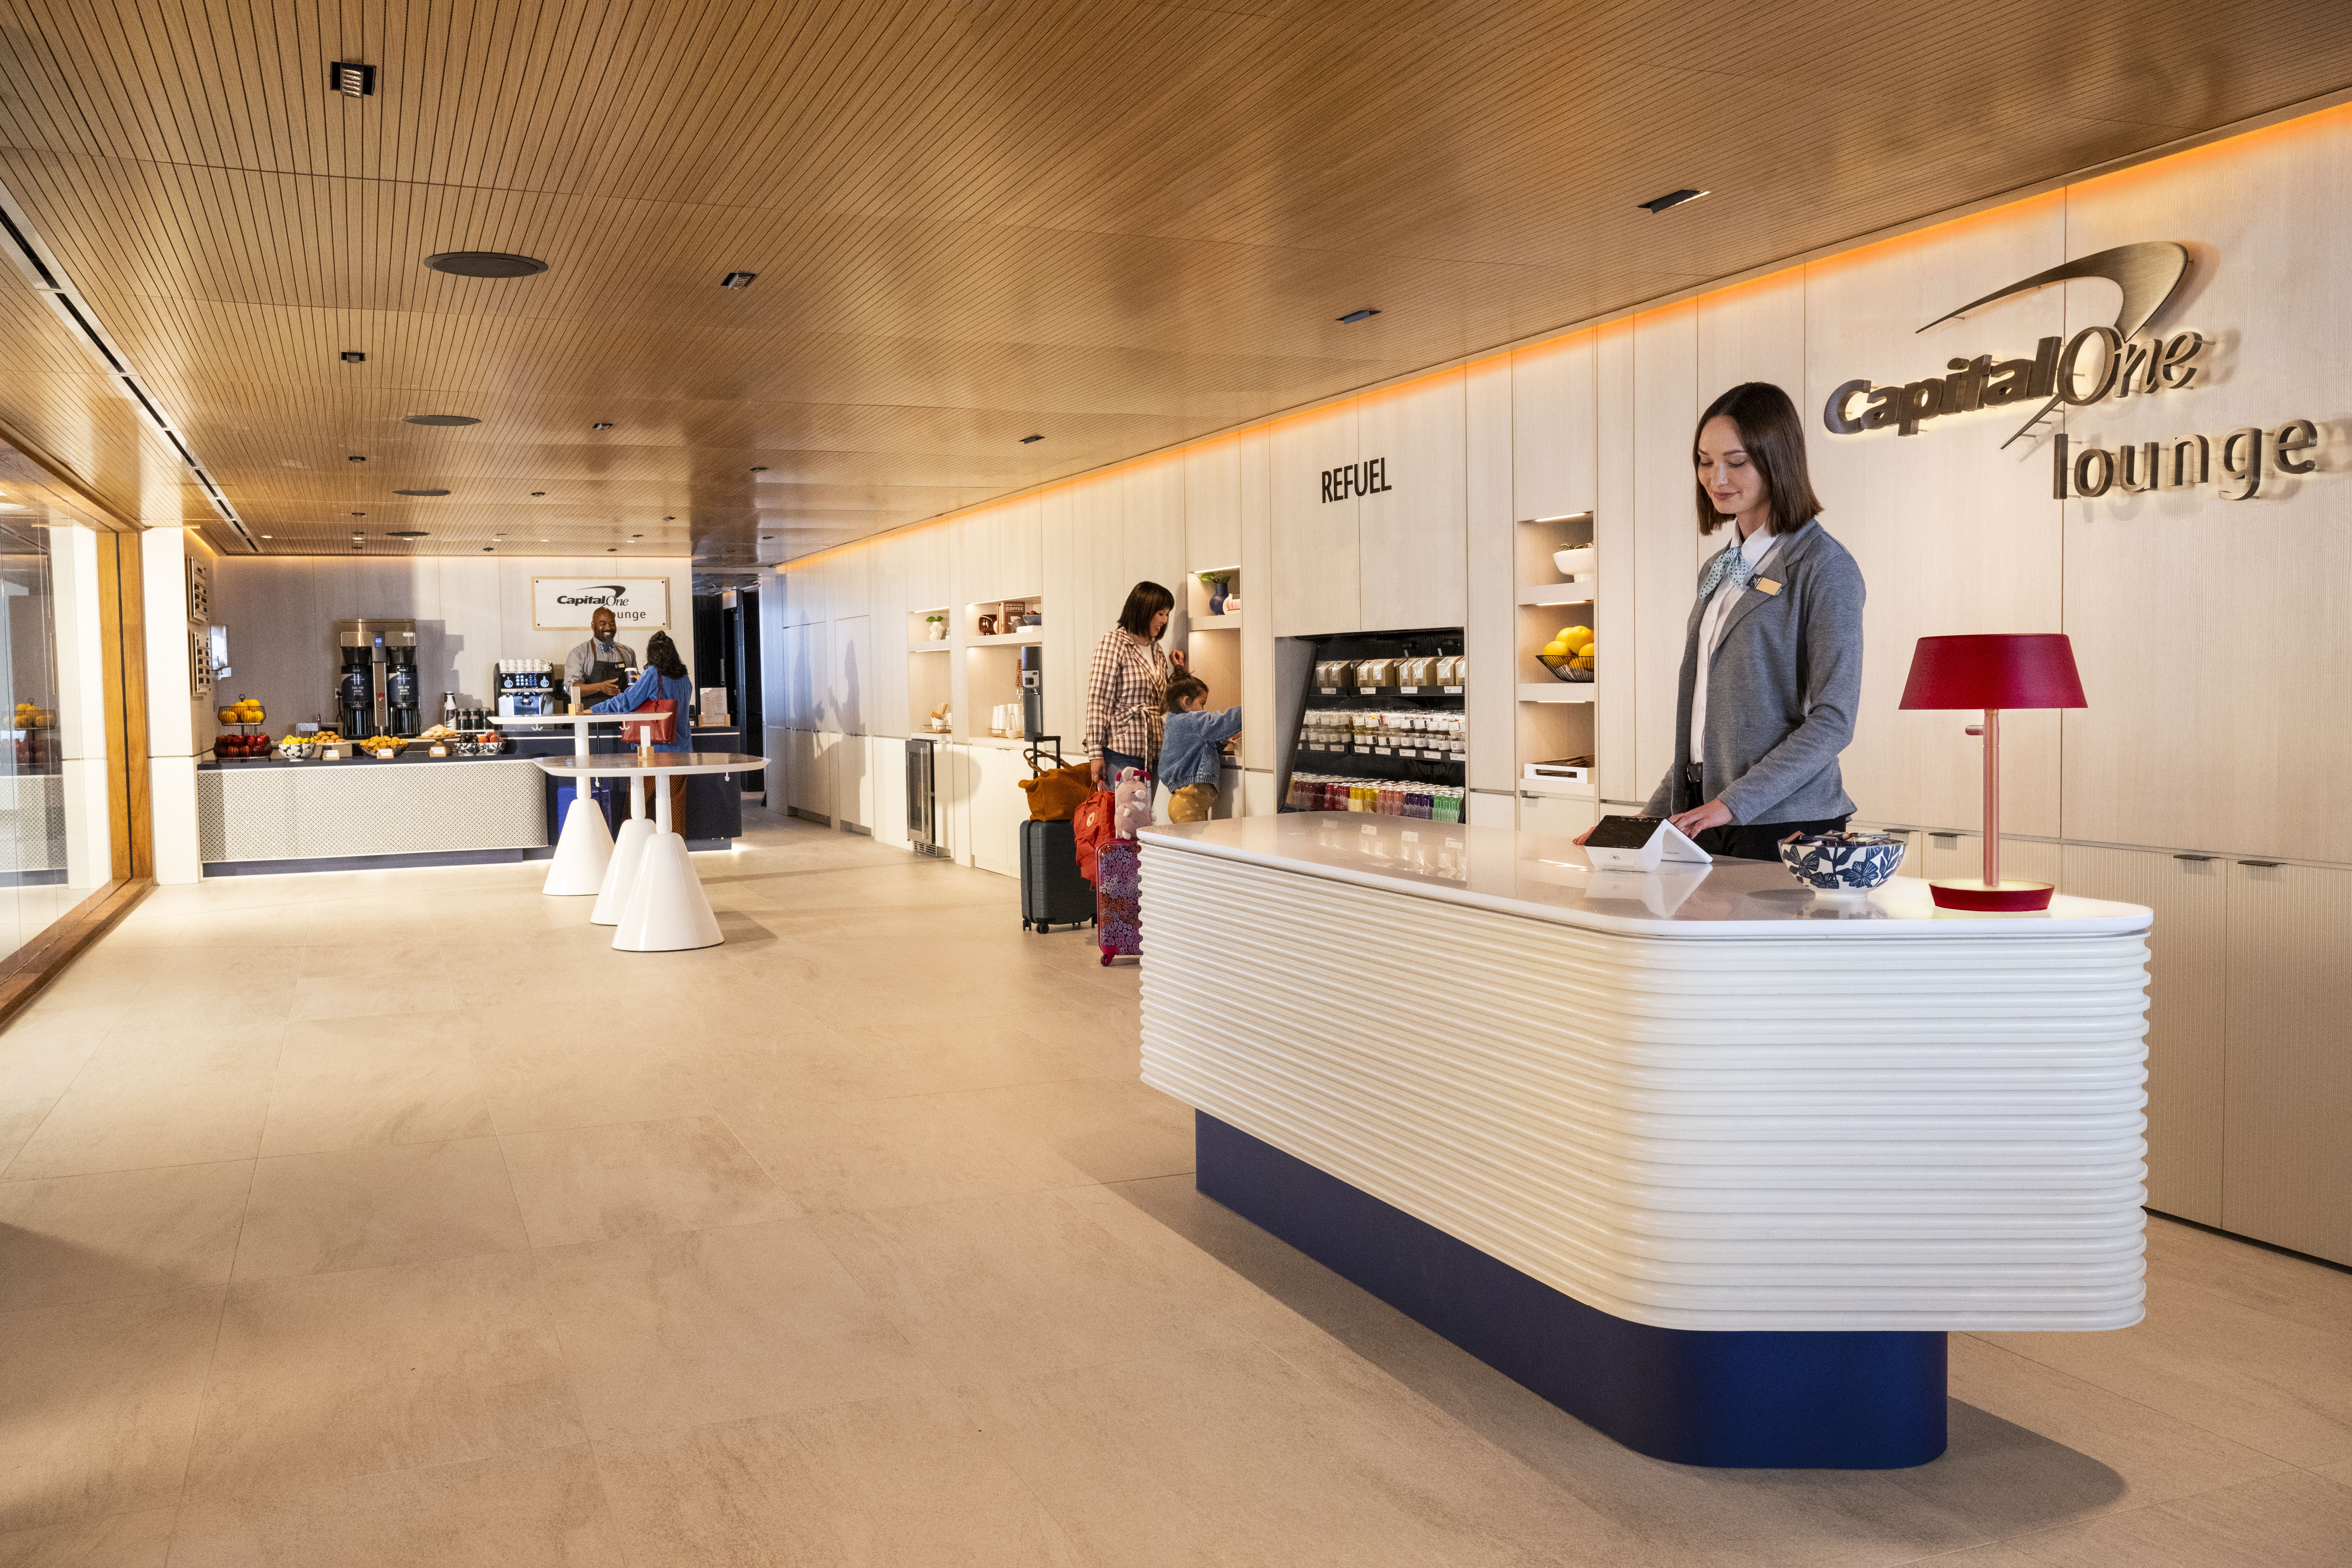 The entrance to the Capital One lounge with grab and go food items in the background